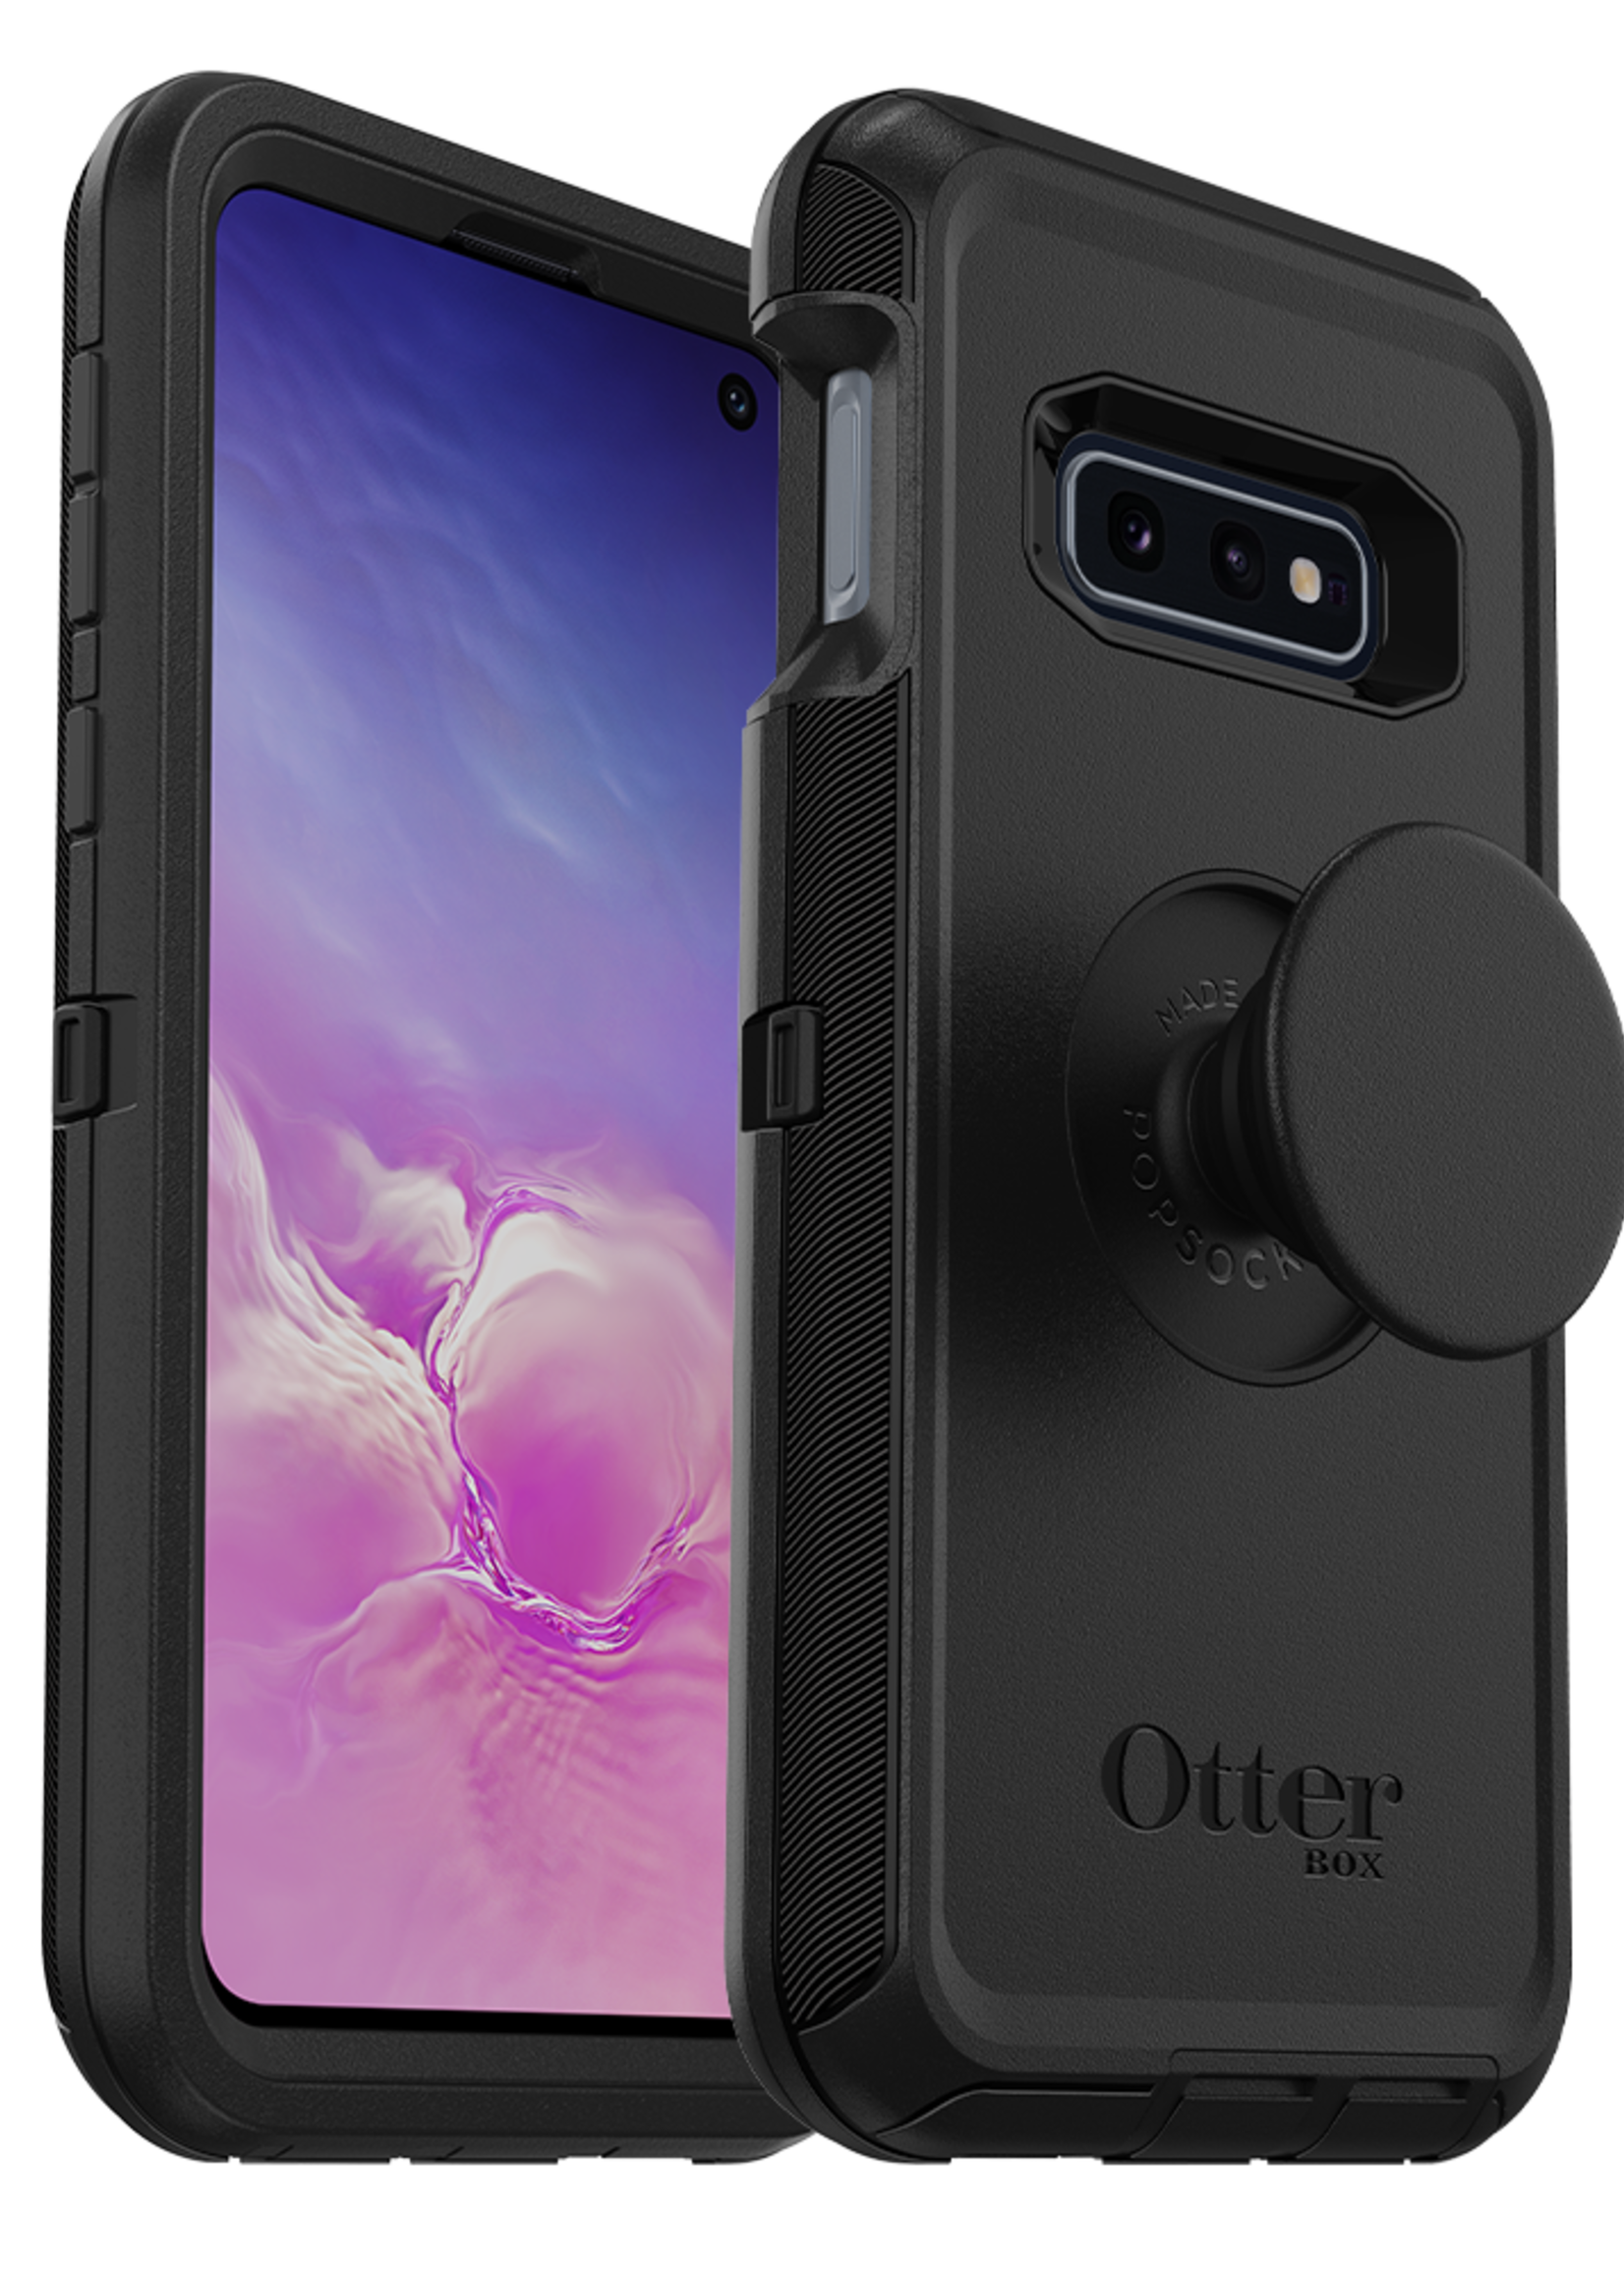 Otterbox OtterBox - Otter + Pop Defender Case with PopGrip for Samsung Galaxy S10e - Black